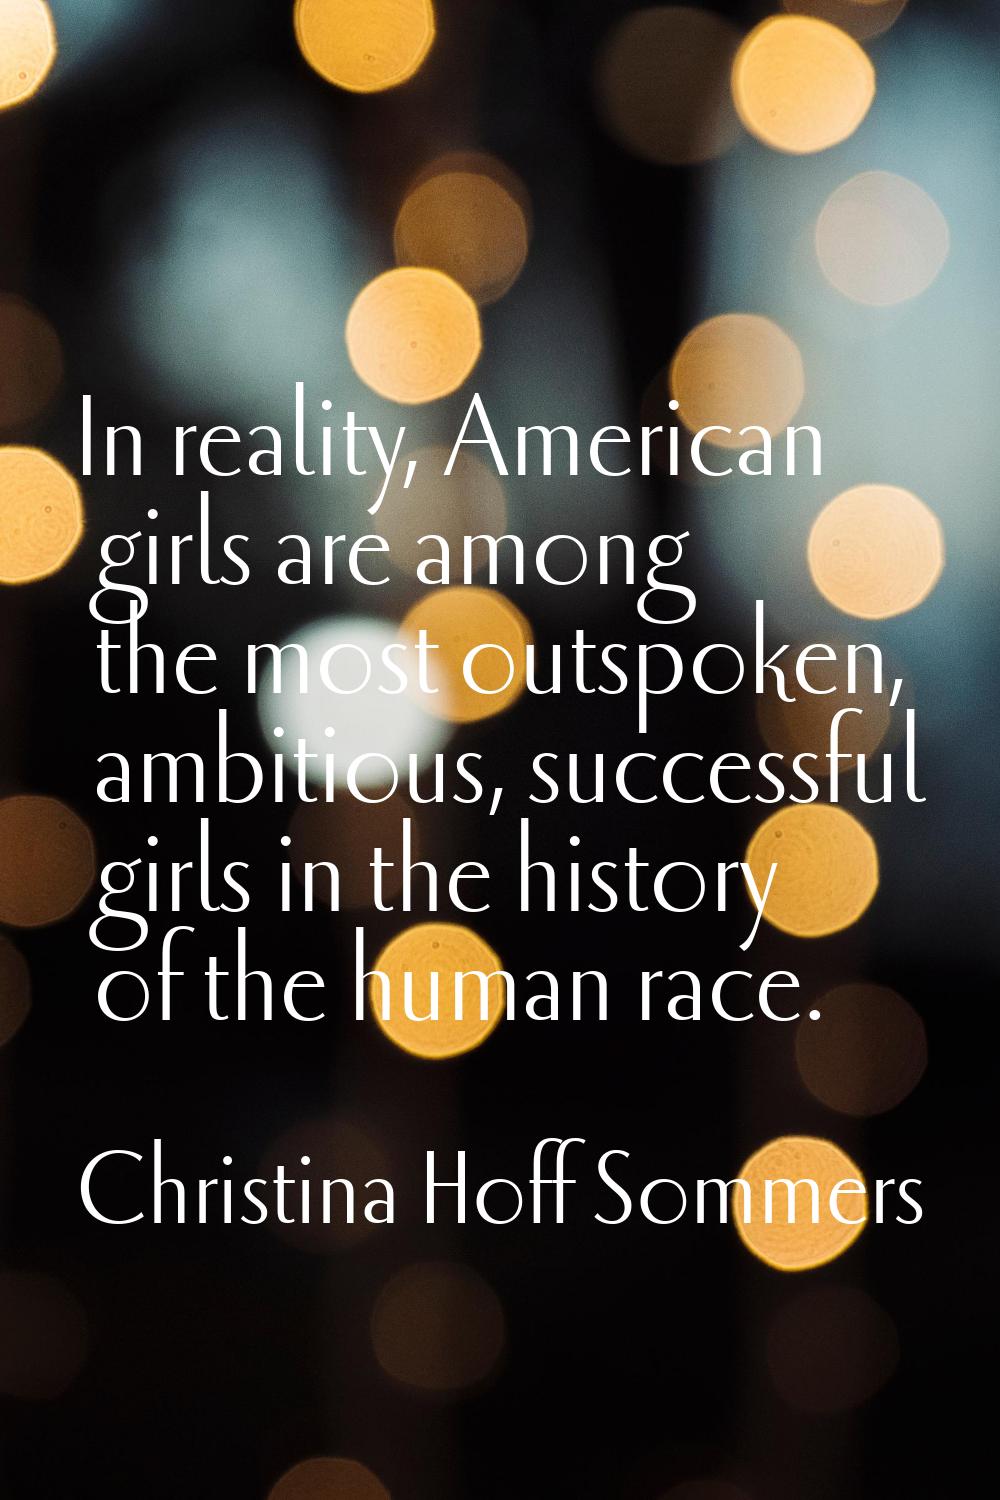 In reality, American girls are among the most outspoken, ambitious, successful girls in the history